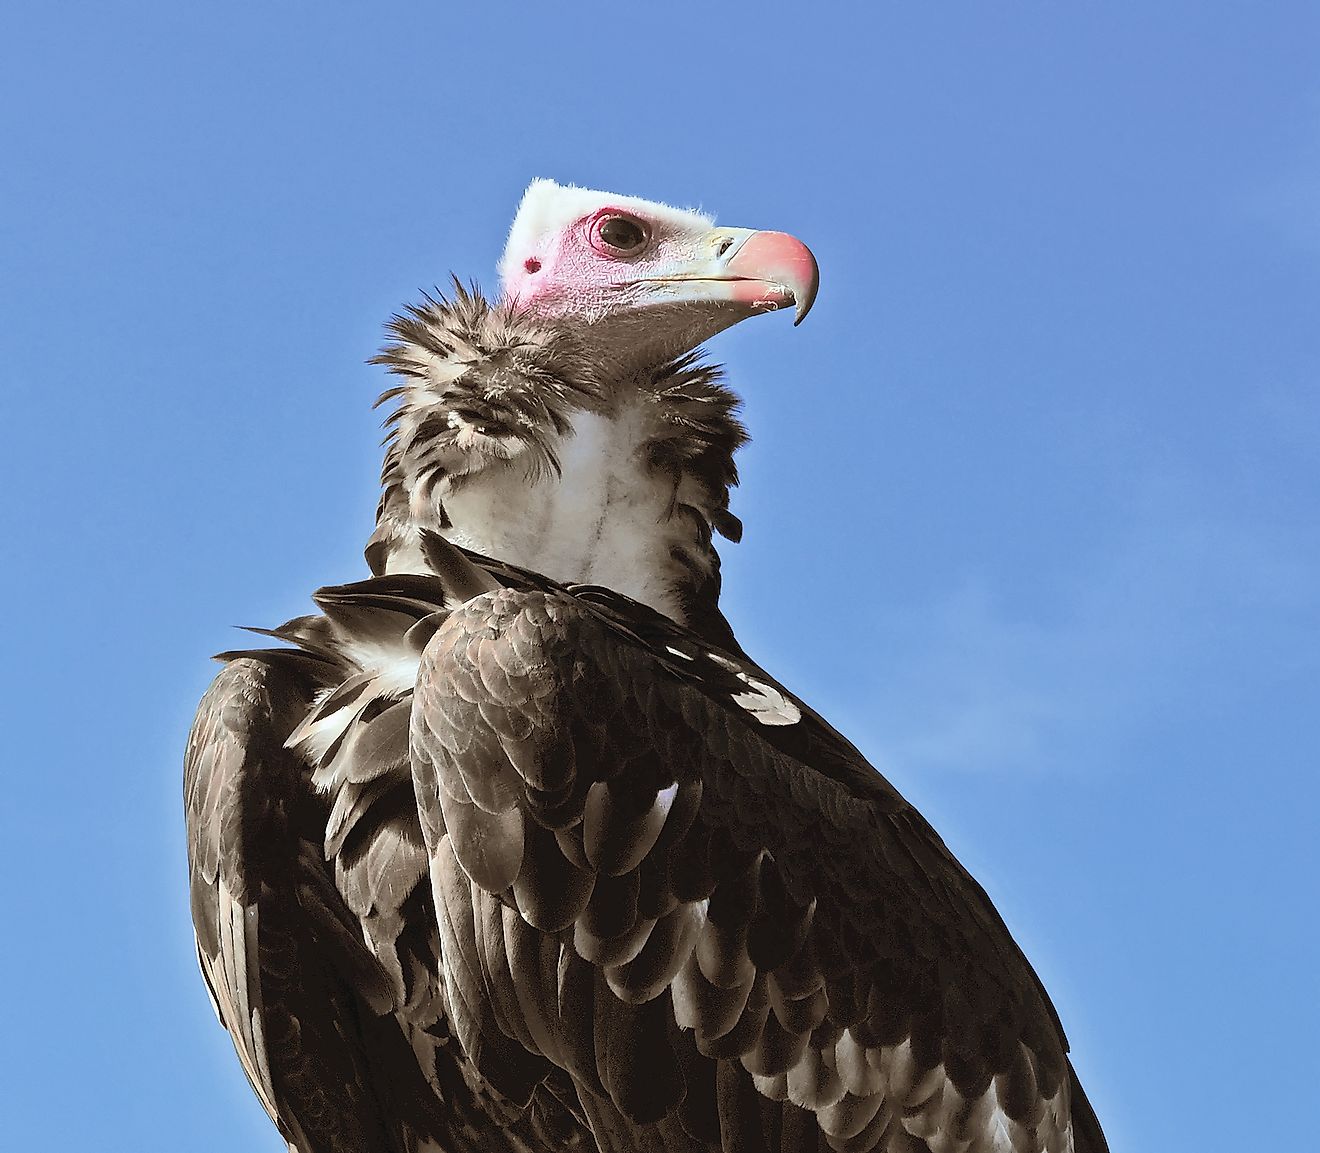 A White-Headed Vulture is a critically endangered species found in Africa.